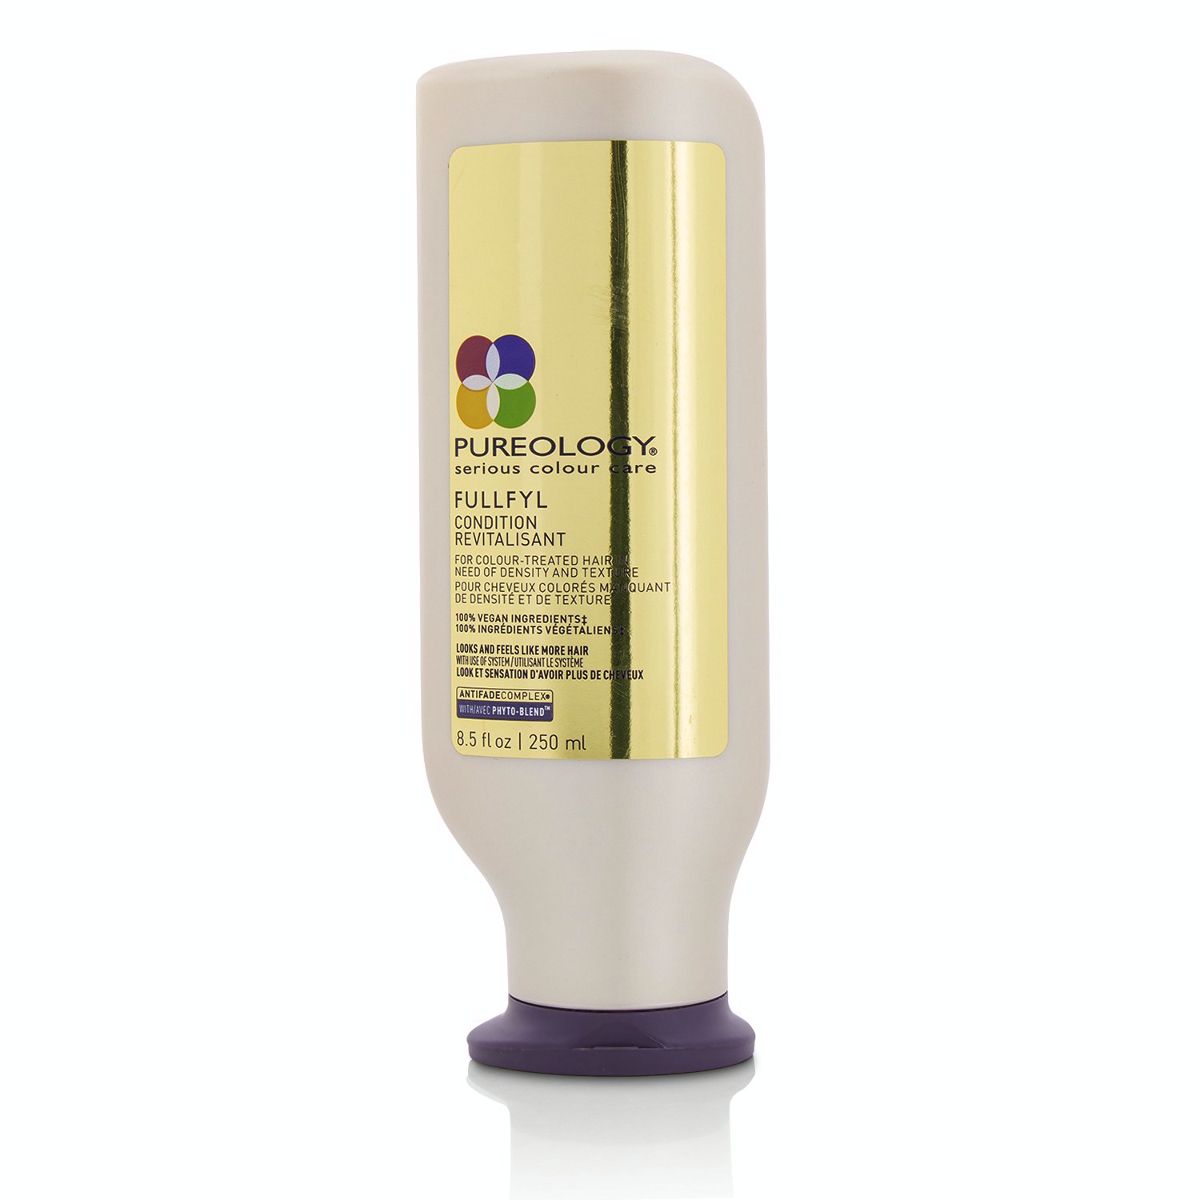 Fullfyl Condition (For Colour-Treated Hair) Pureology Image